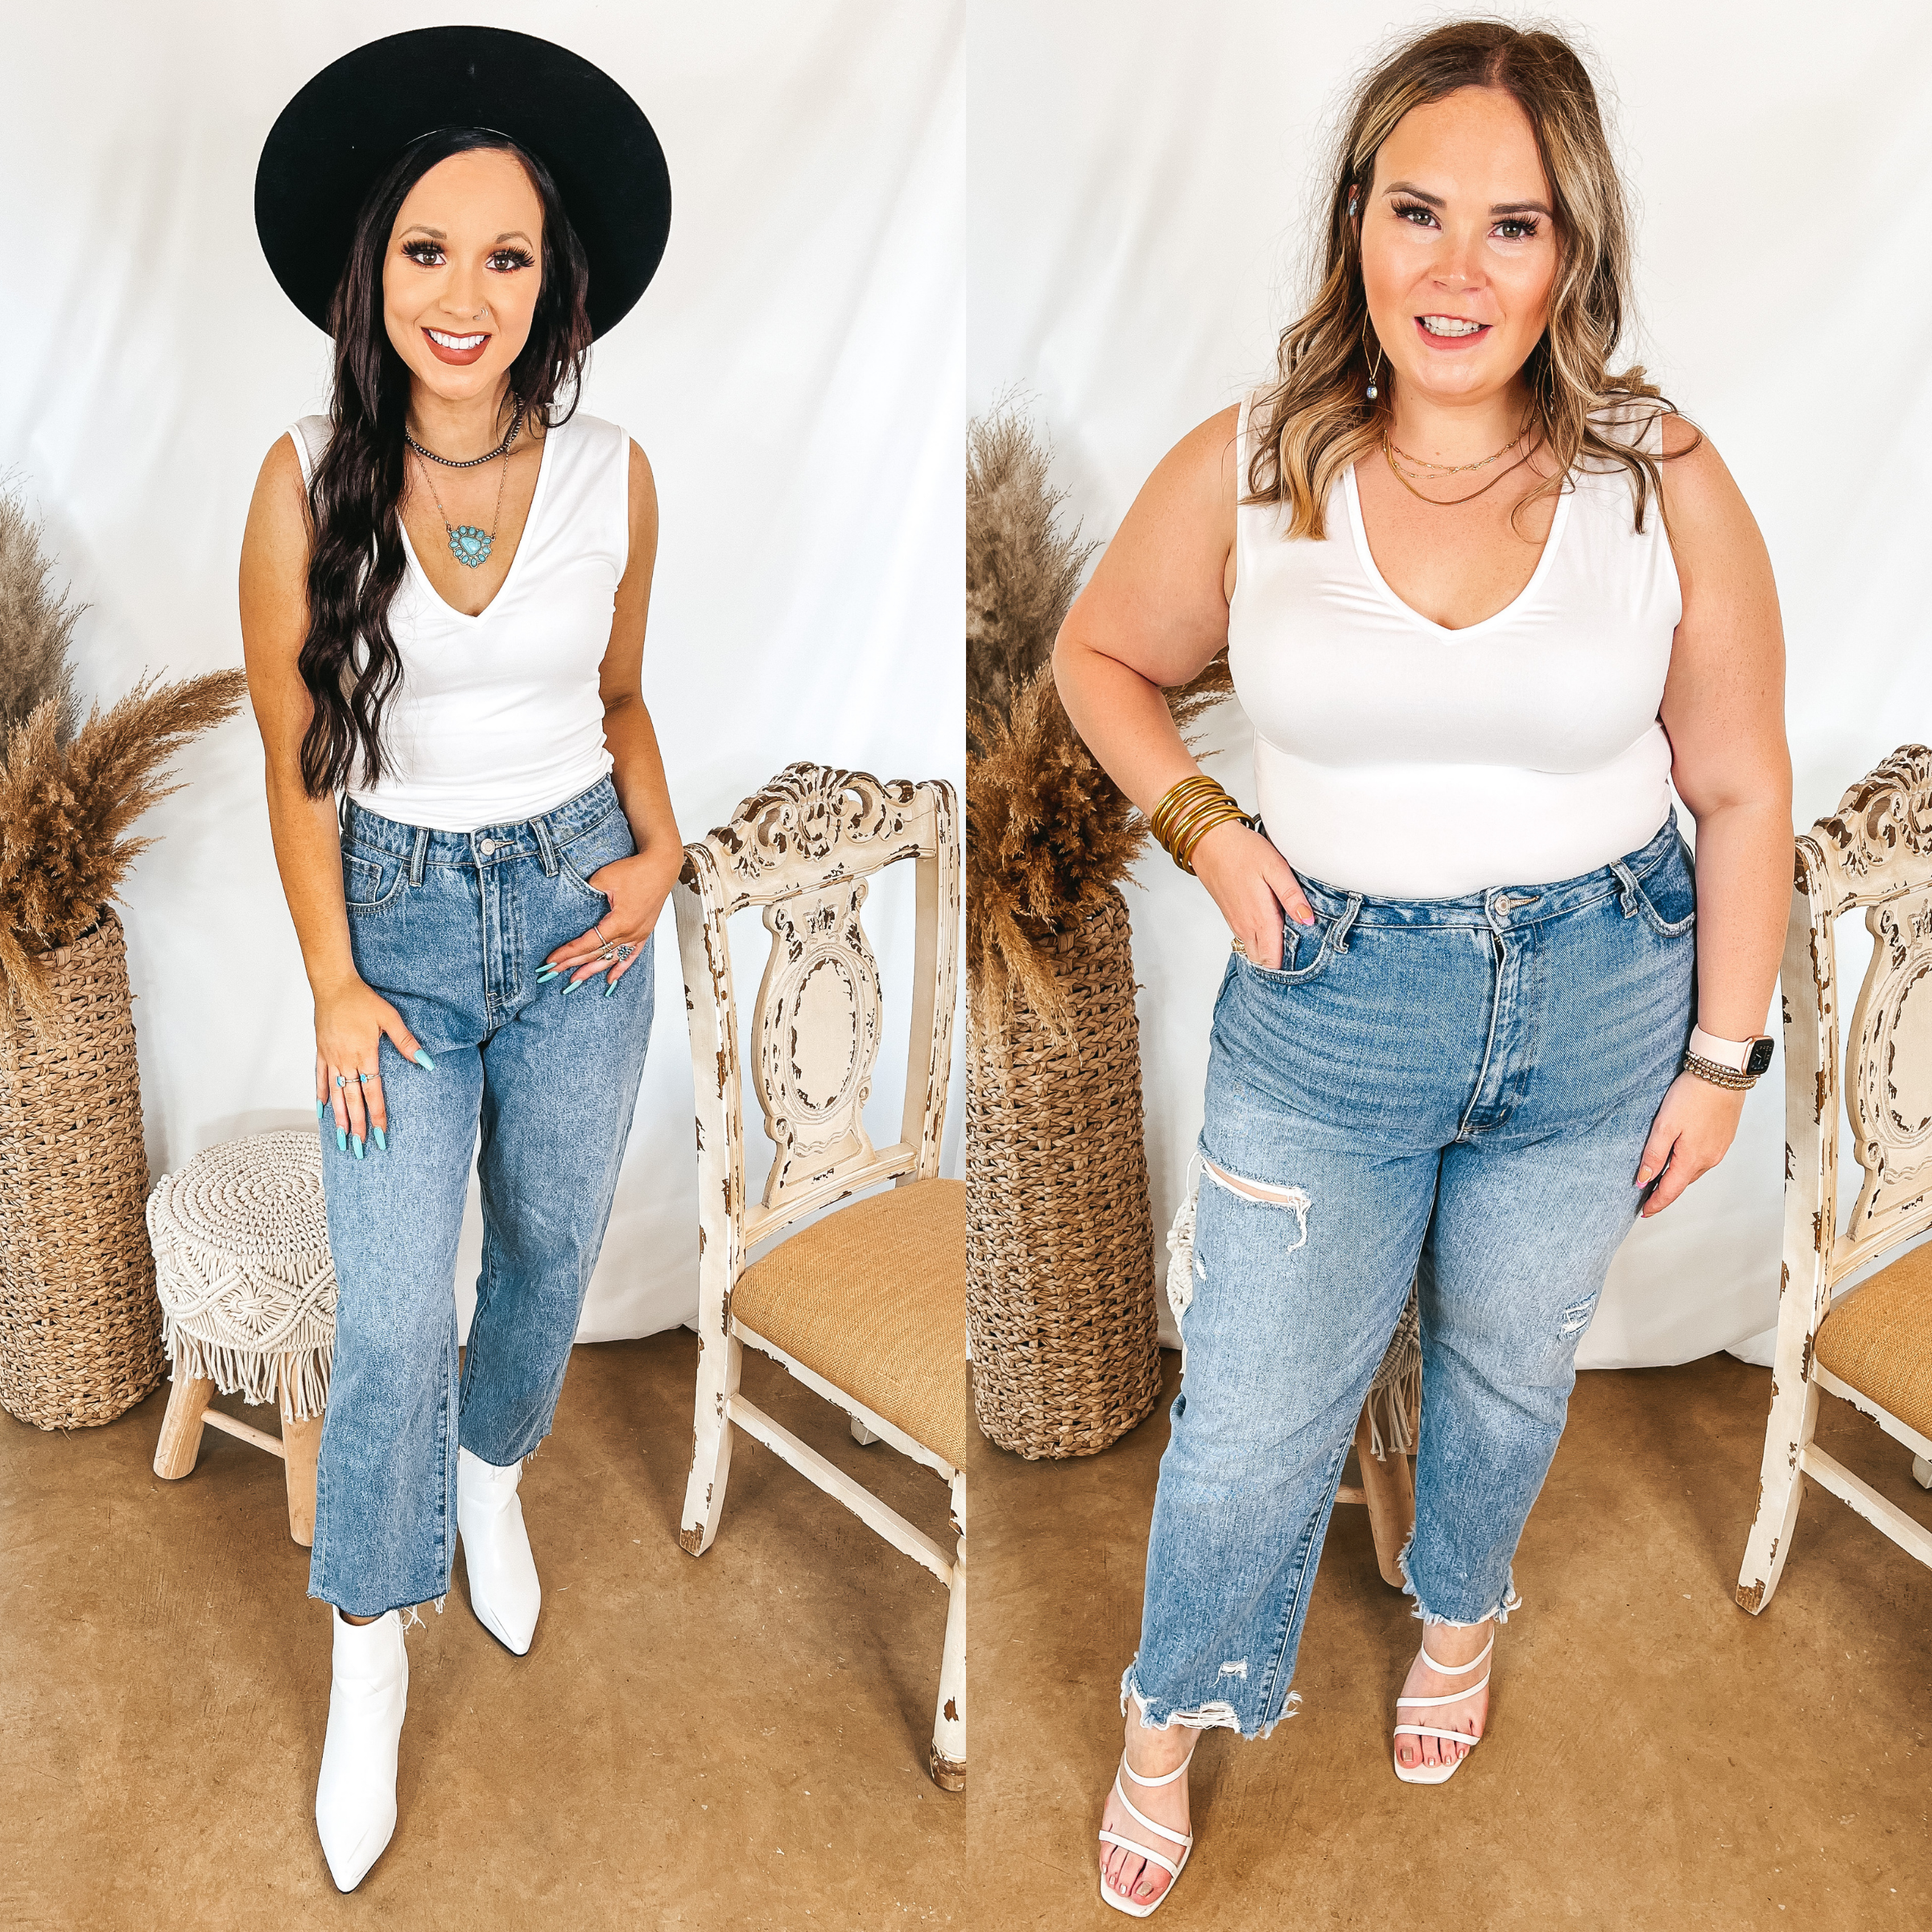 Models are wearing a white tank top bodysuit with a deep v neckline. Size small model has it paired with light wash jeans, white booties, and a black hat. Size large model has it paired with light wash jeans, strappy white heels, and gold jewelry.